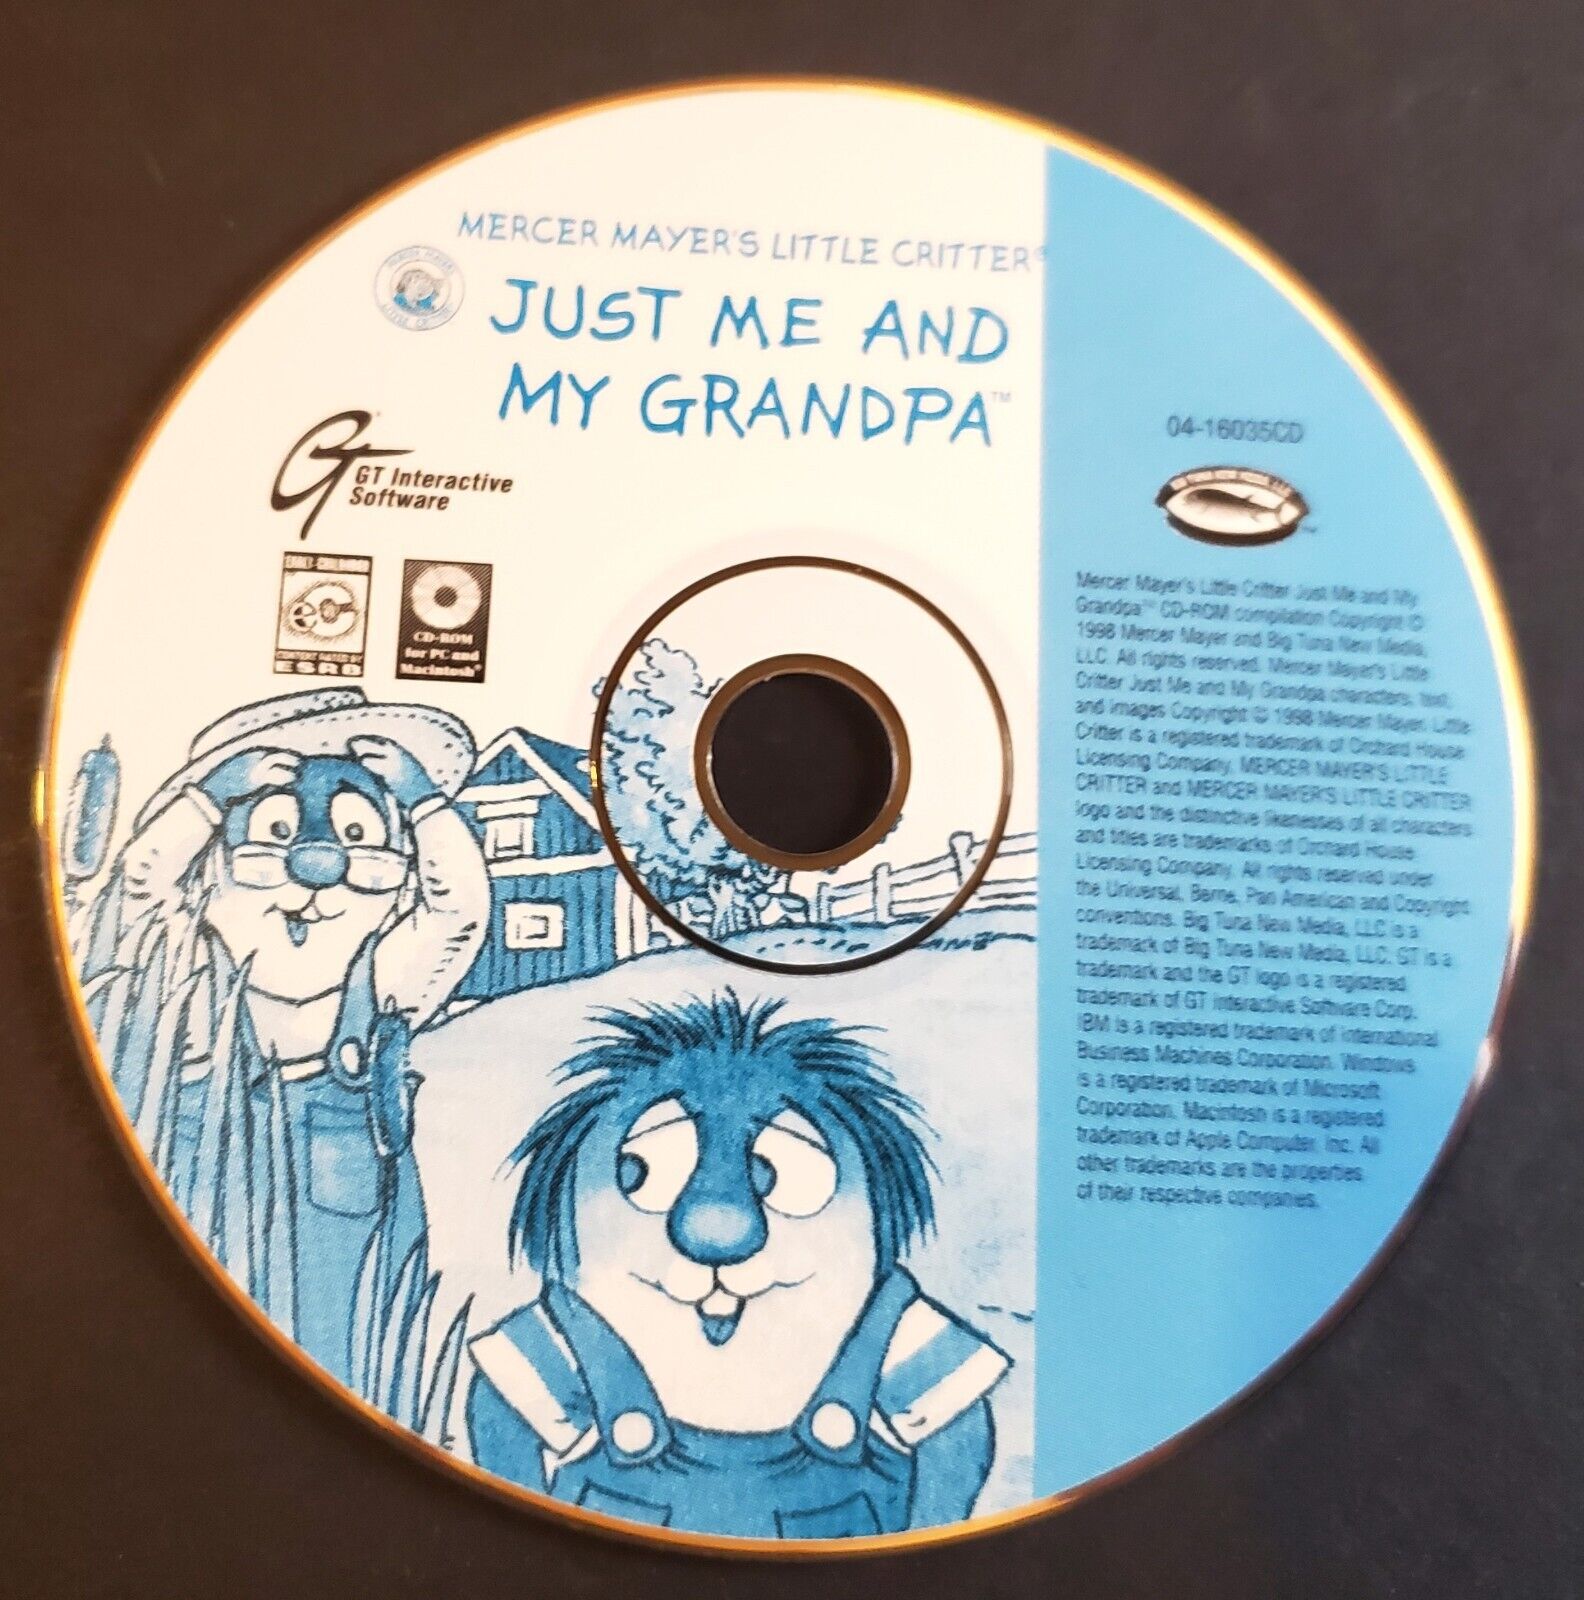 Mercer Mayer's Little Critter - Just Me and My Grandpa Vintage CD-ROM 1998 GT